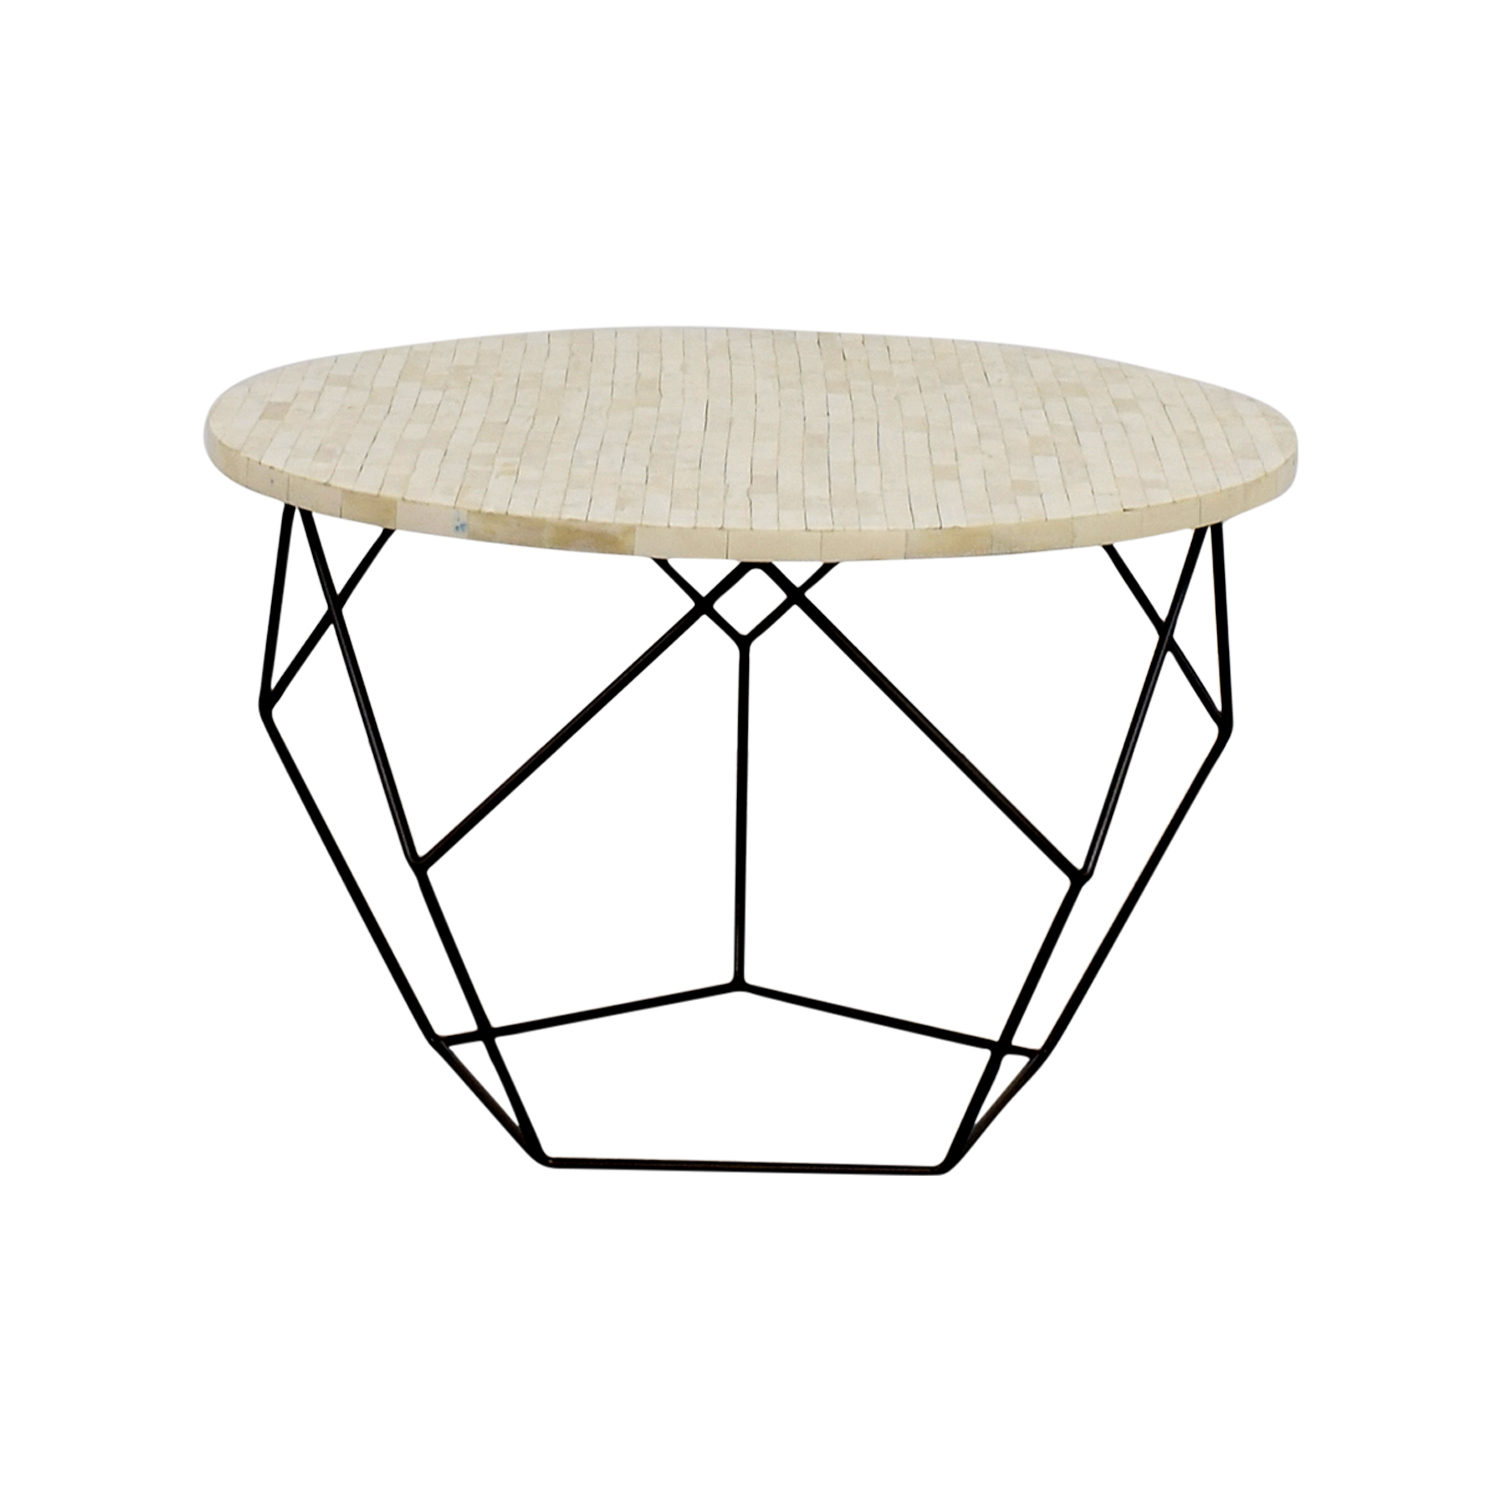 Origami Coffee Table 42 Off West Elm West Elm Origami Bone Coffee Table Tables